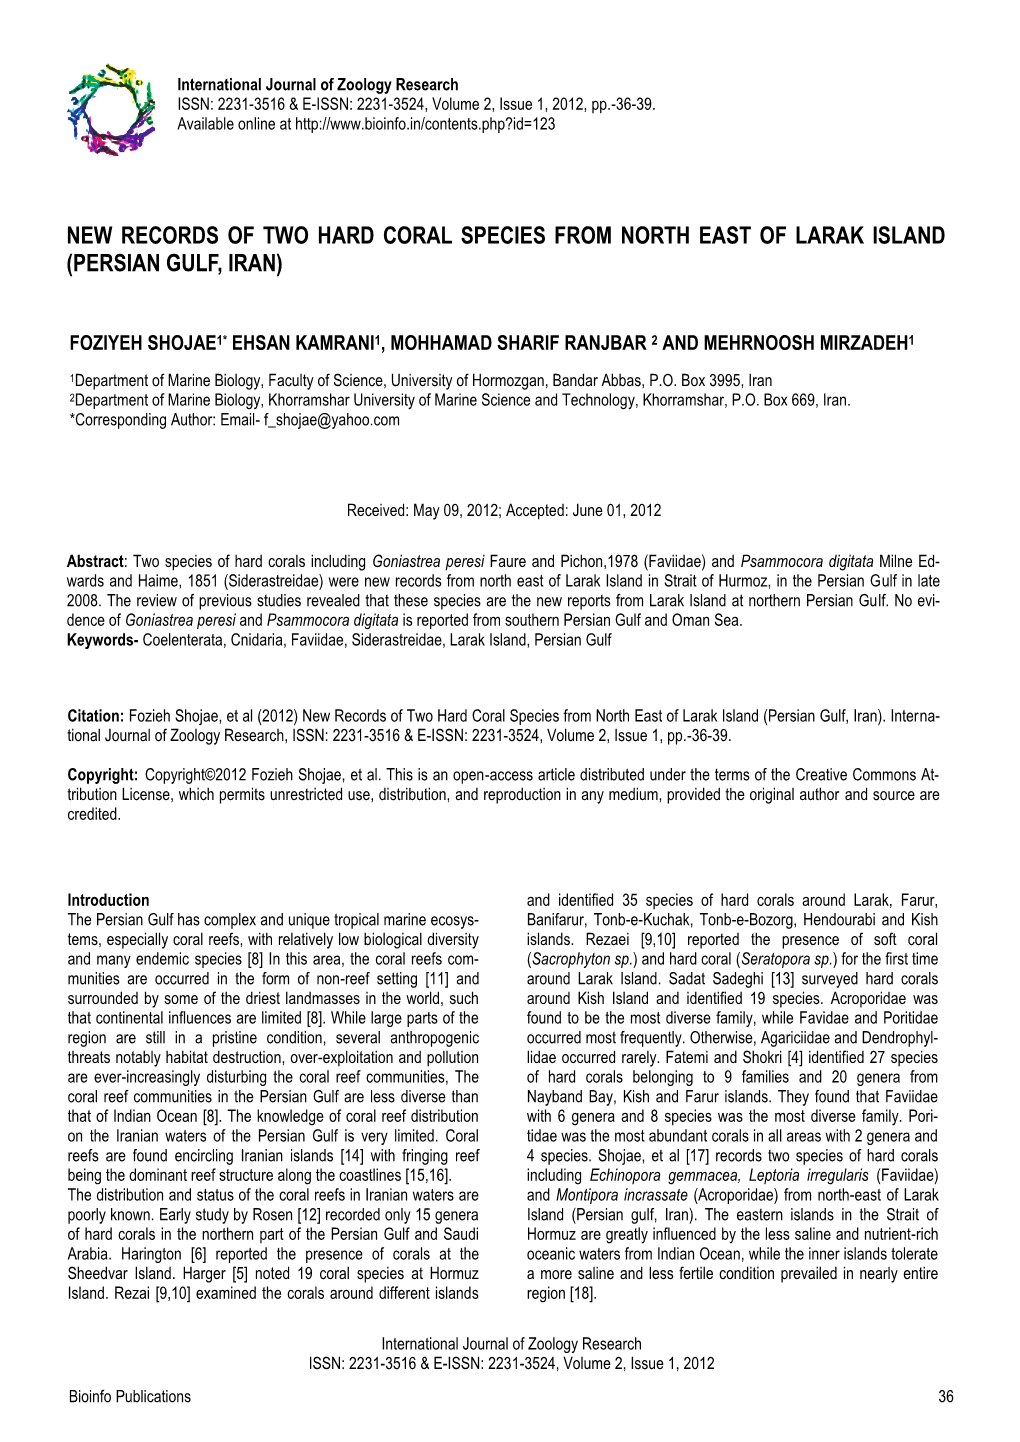 New Records of Two Hard Coral Species from North East of Larak Island (Persian Gulf, Iran)